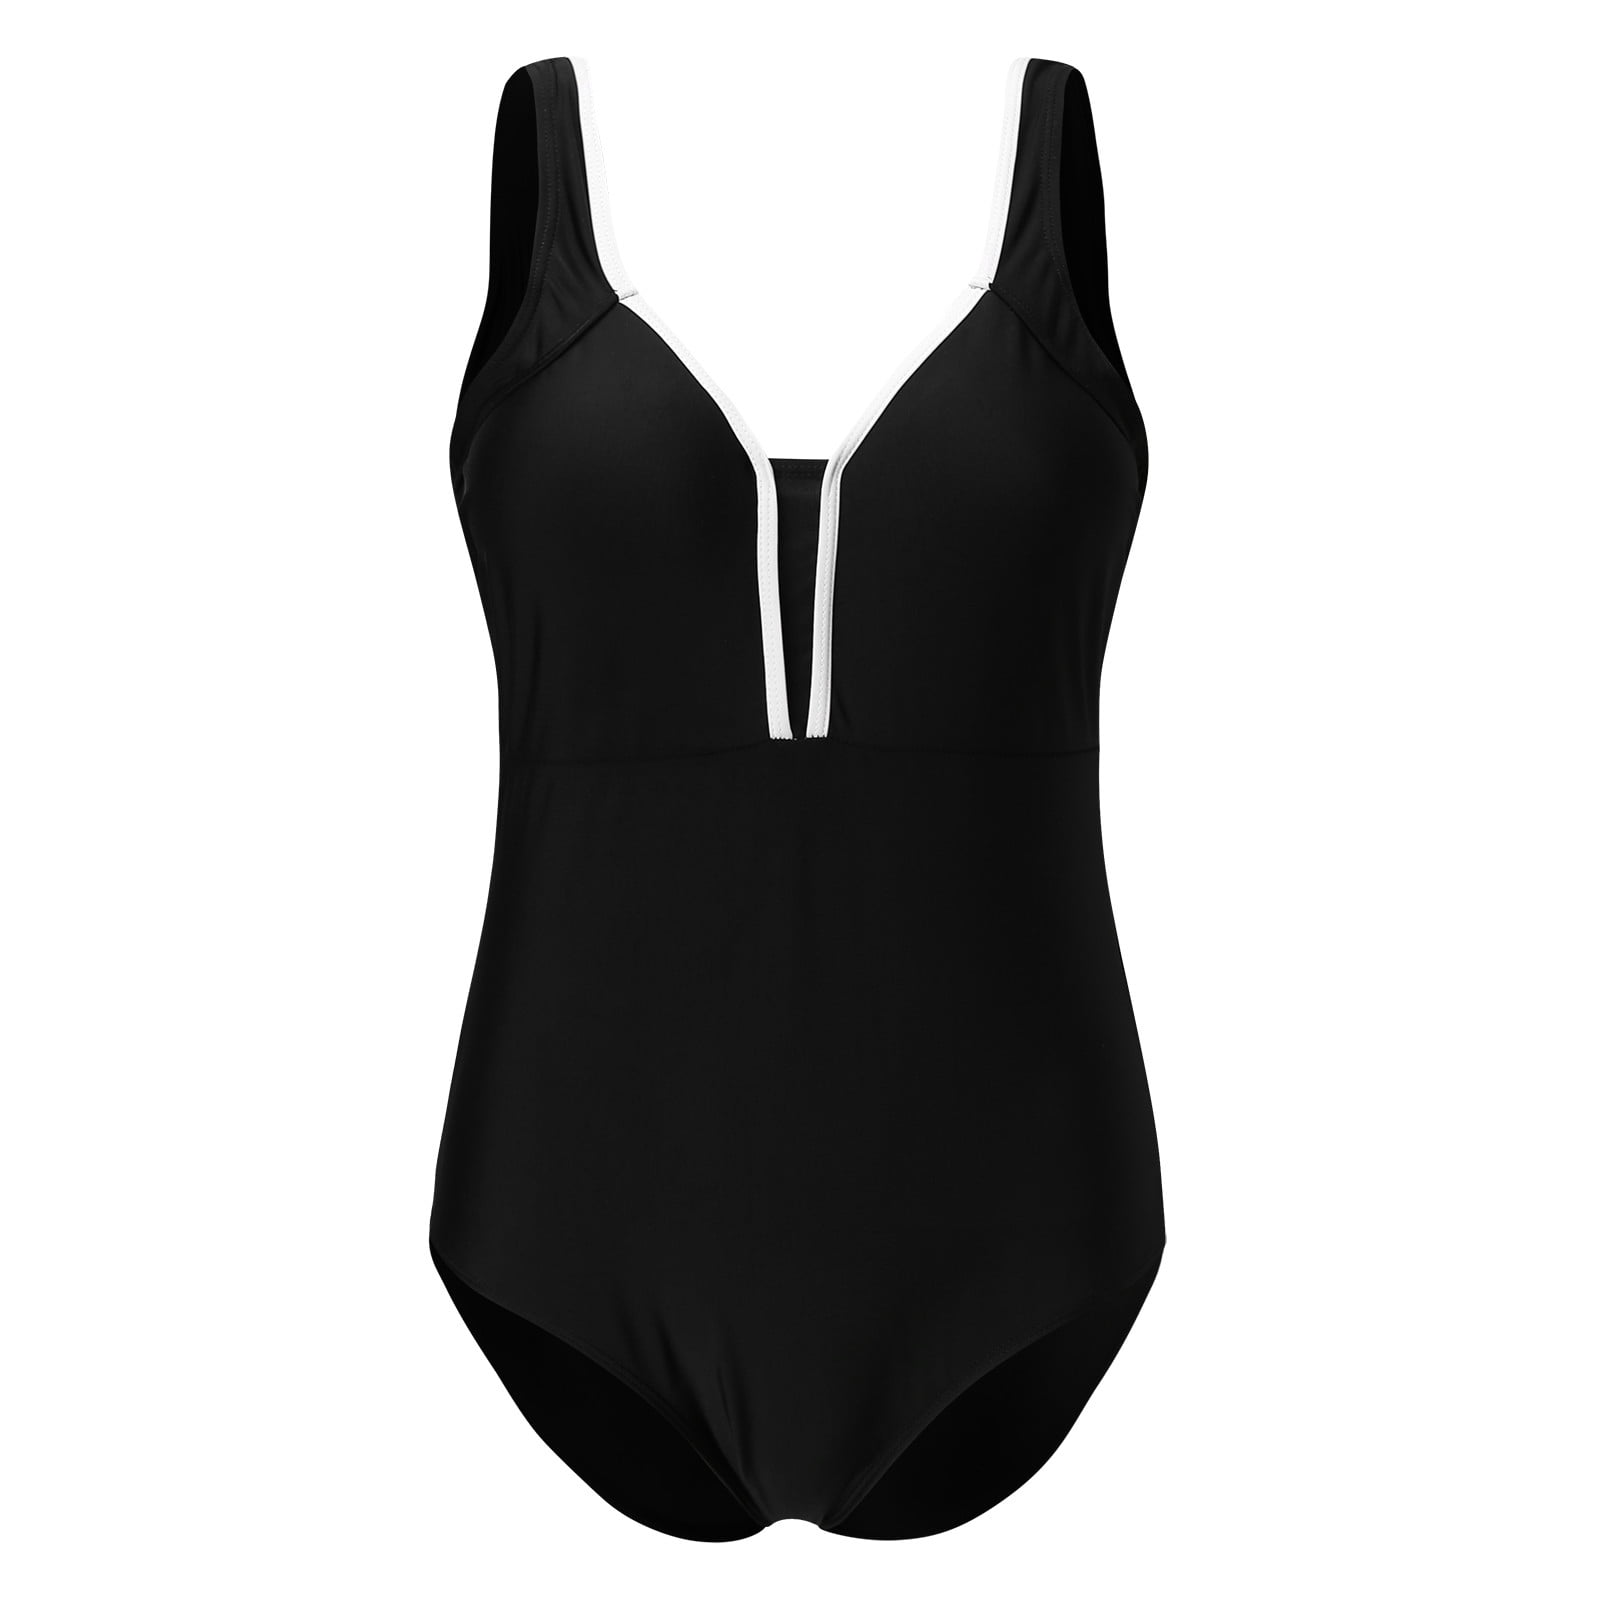 Aayomet Womens Bathing Suits Women S One Piece Swimsuits Tummy Control Cutout High Waisted